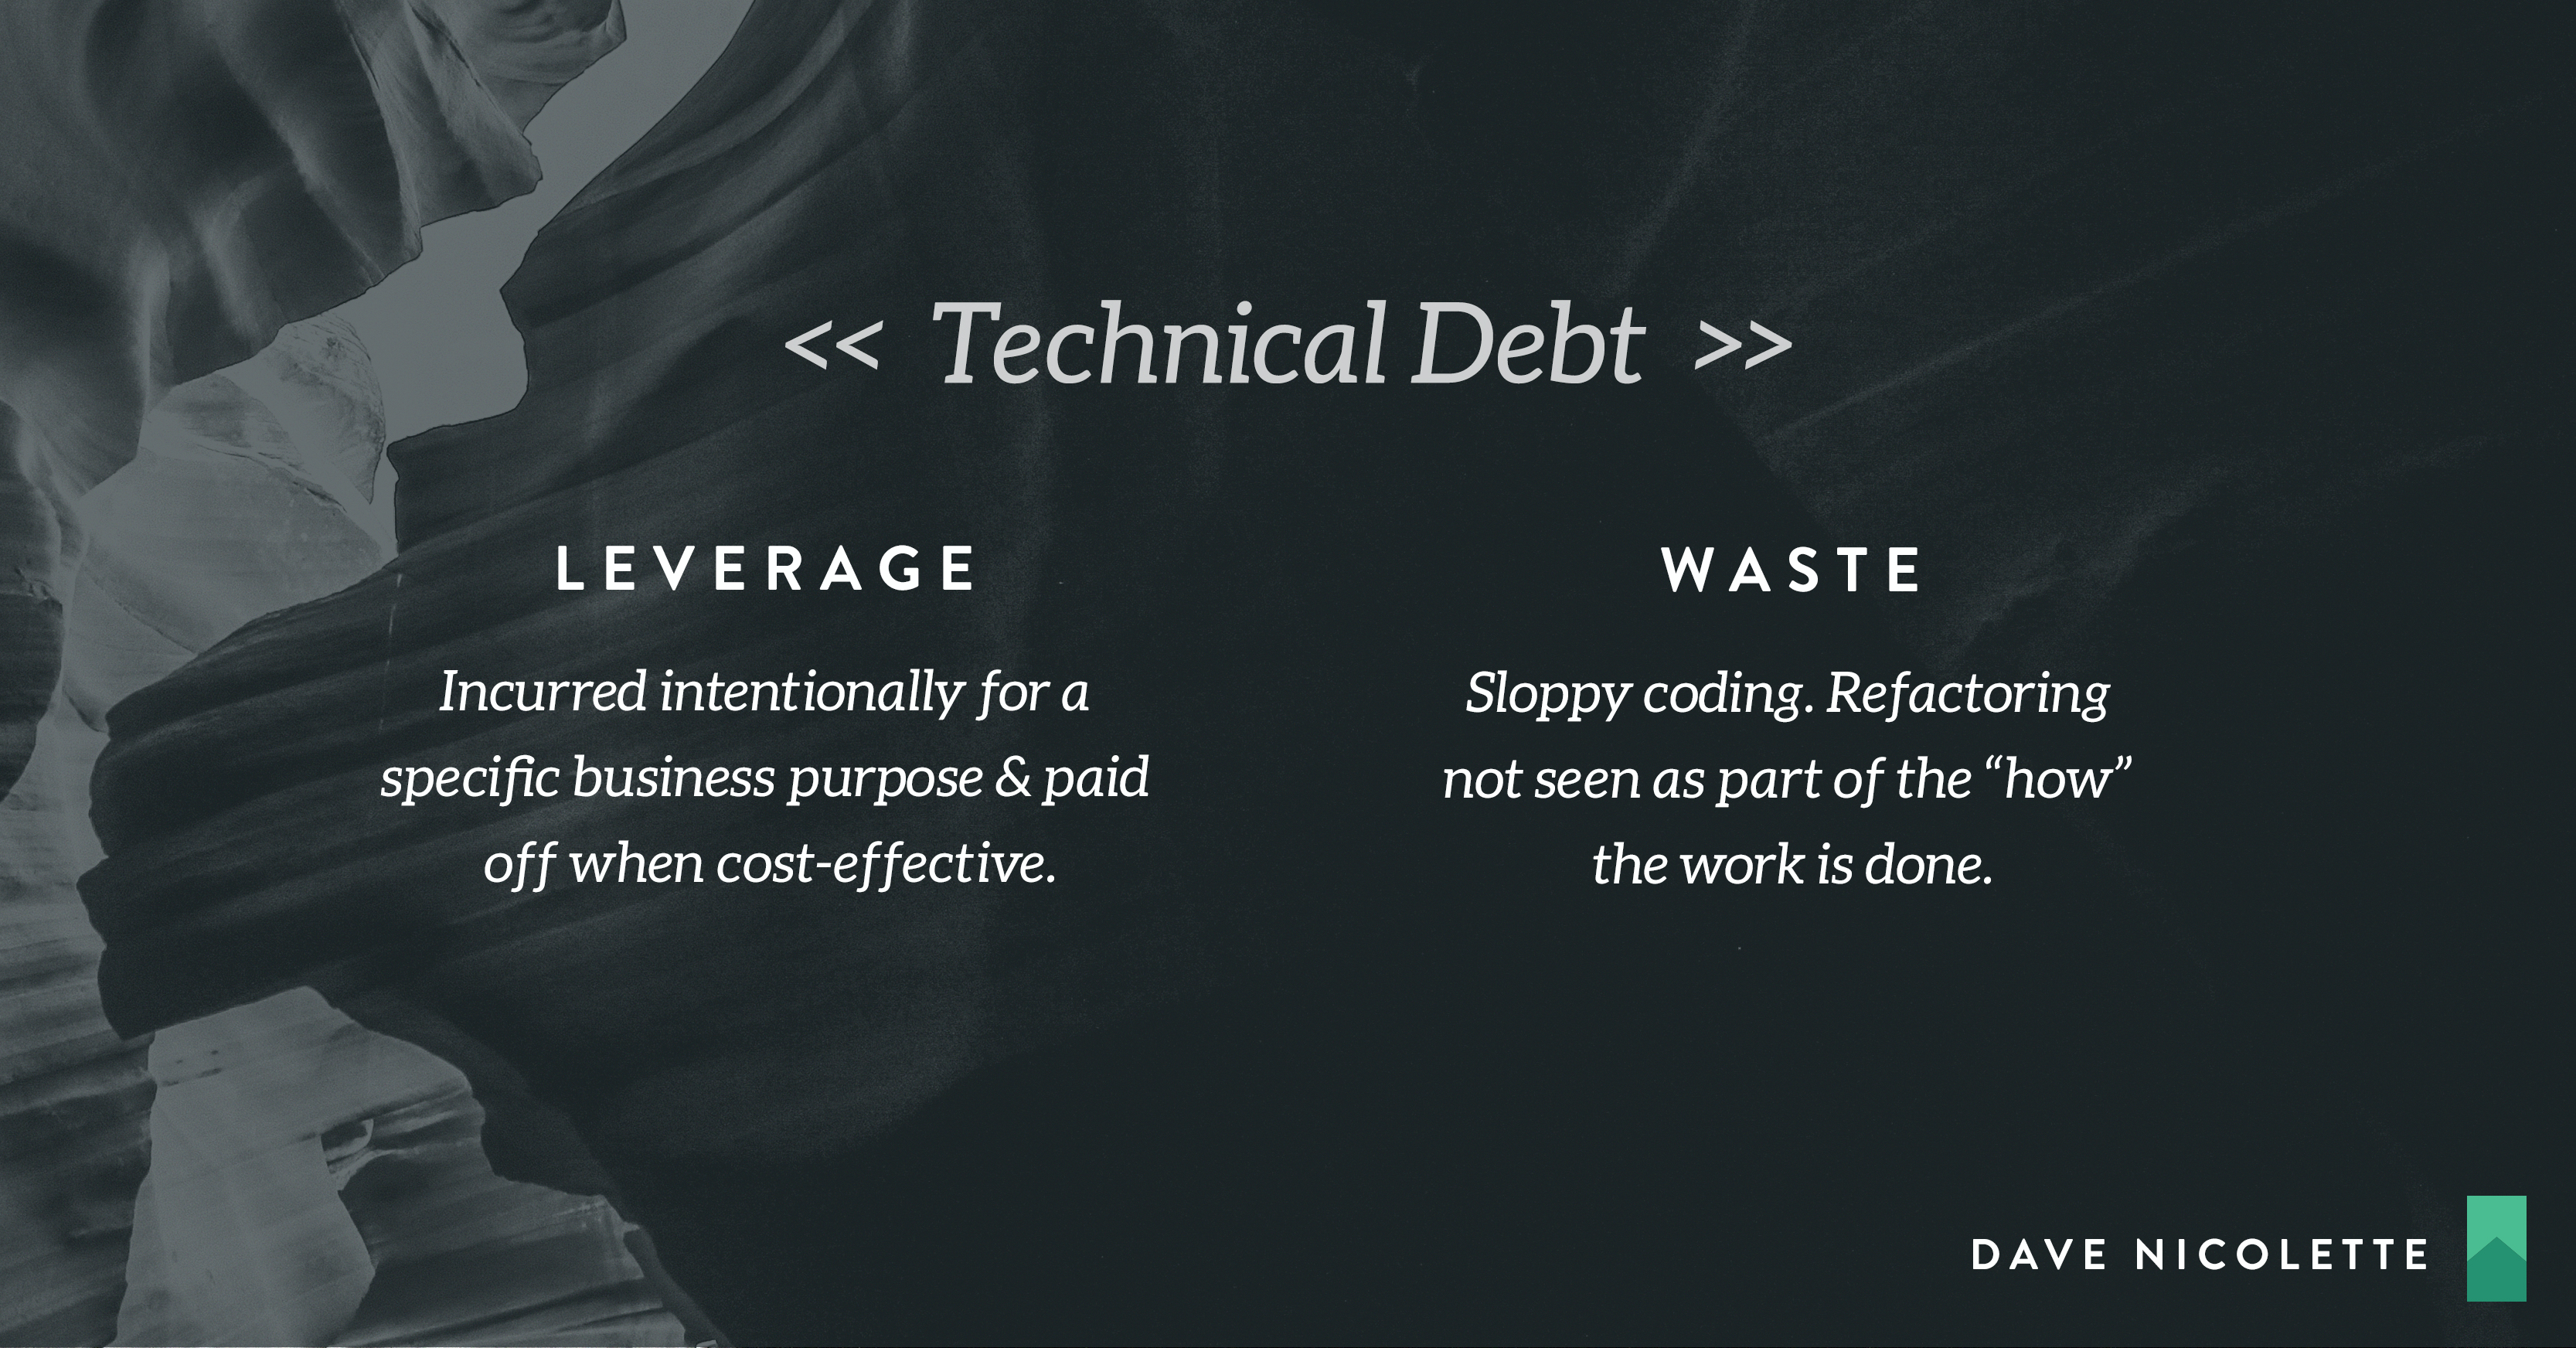 Planning for technical debt